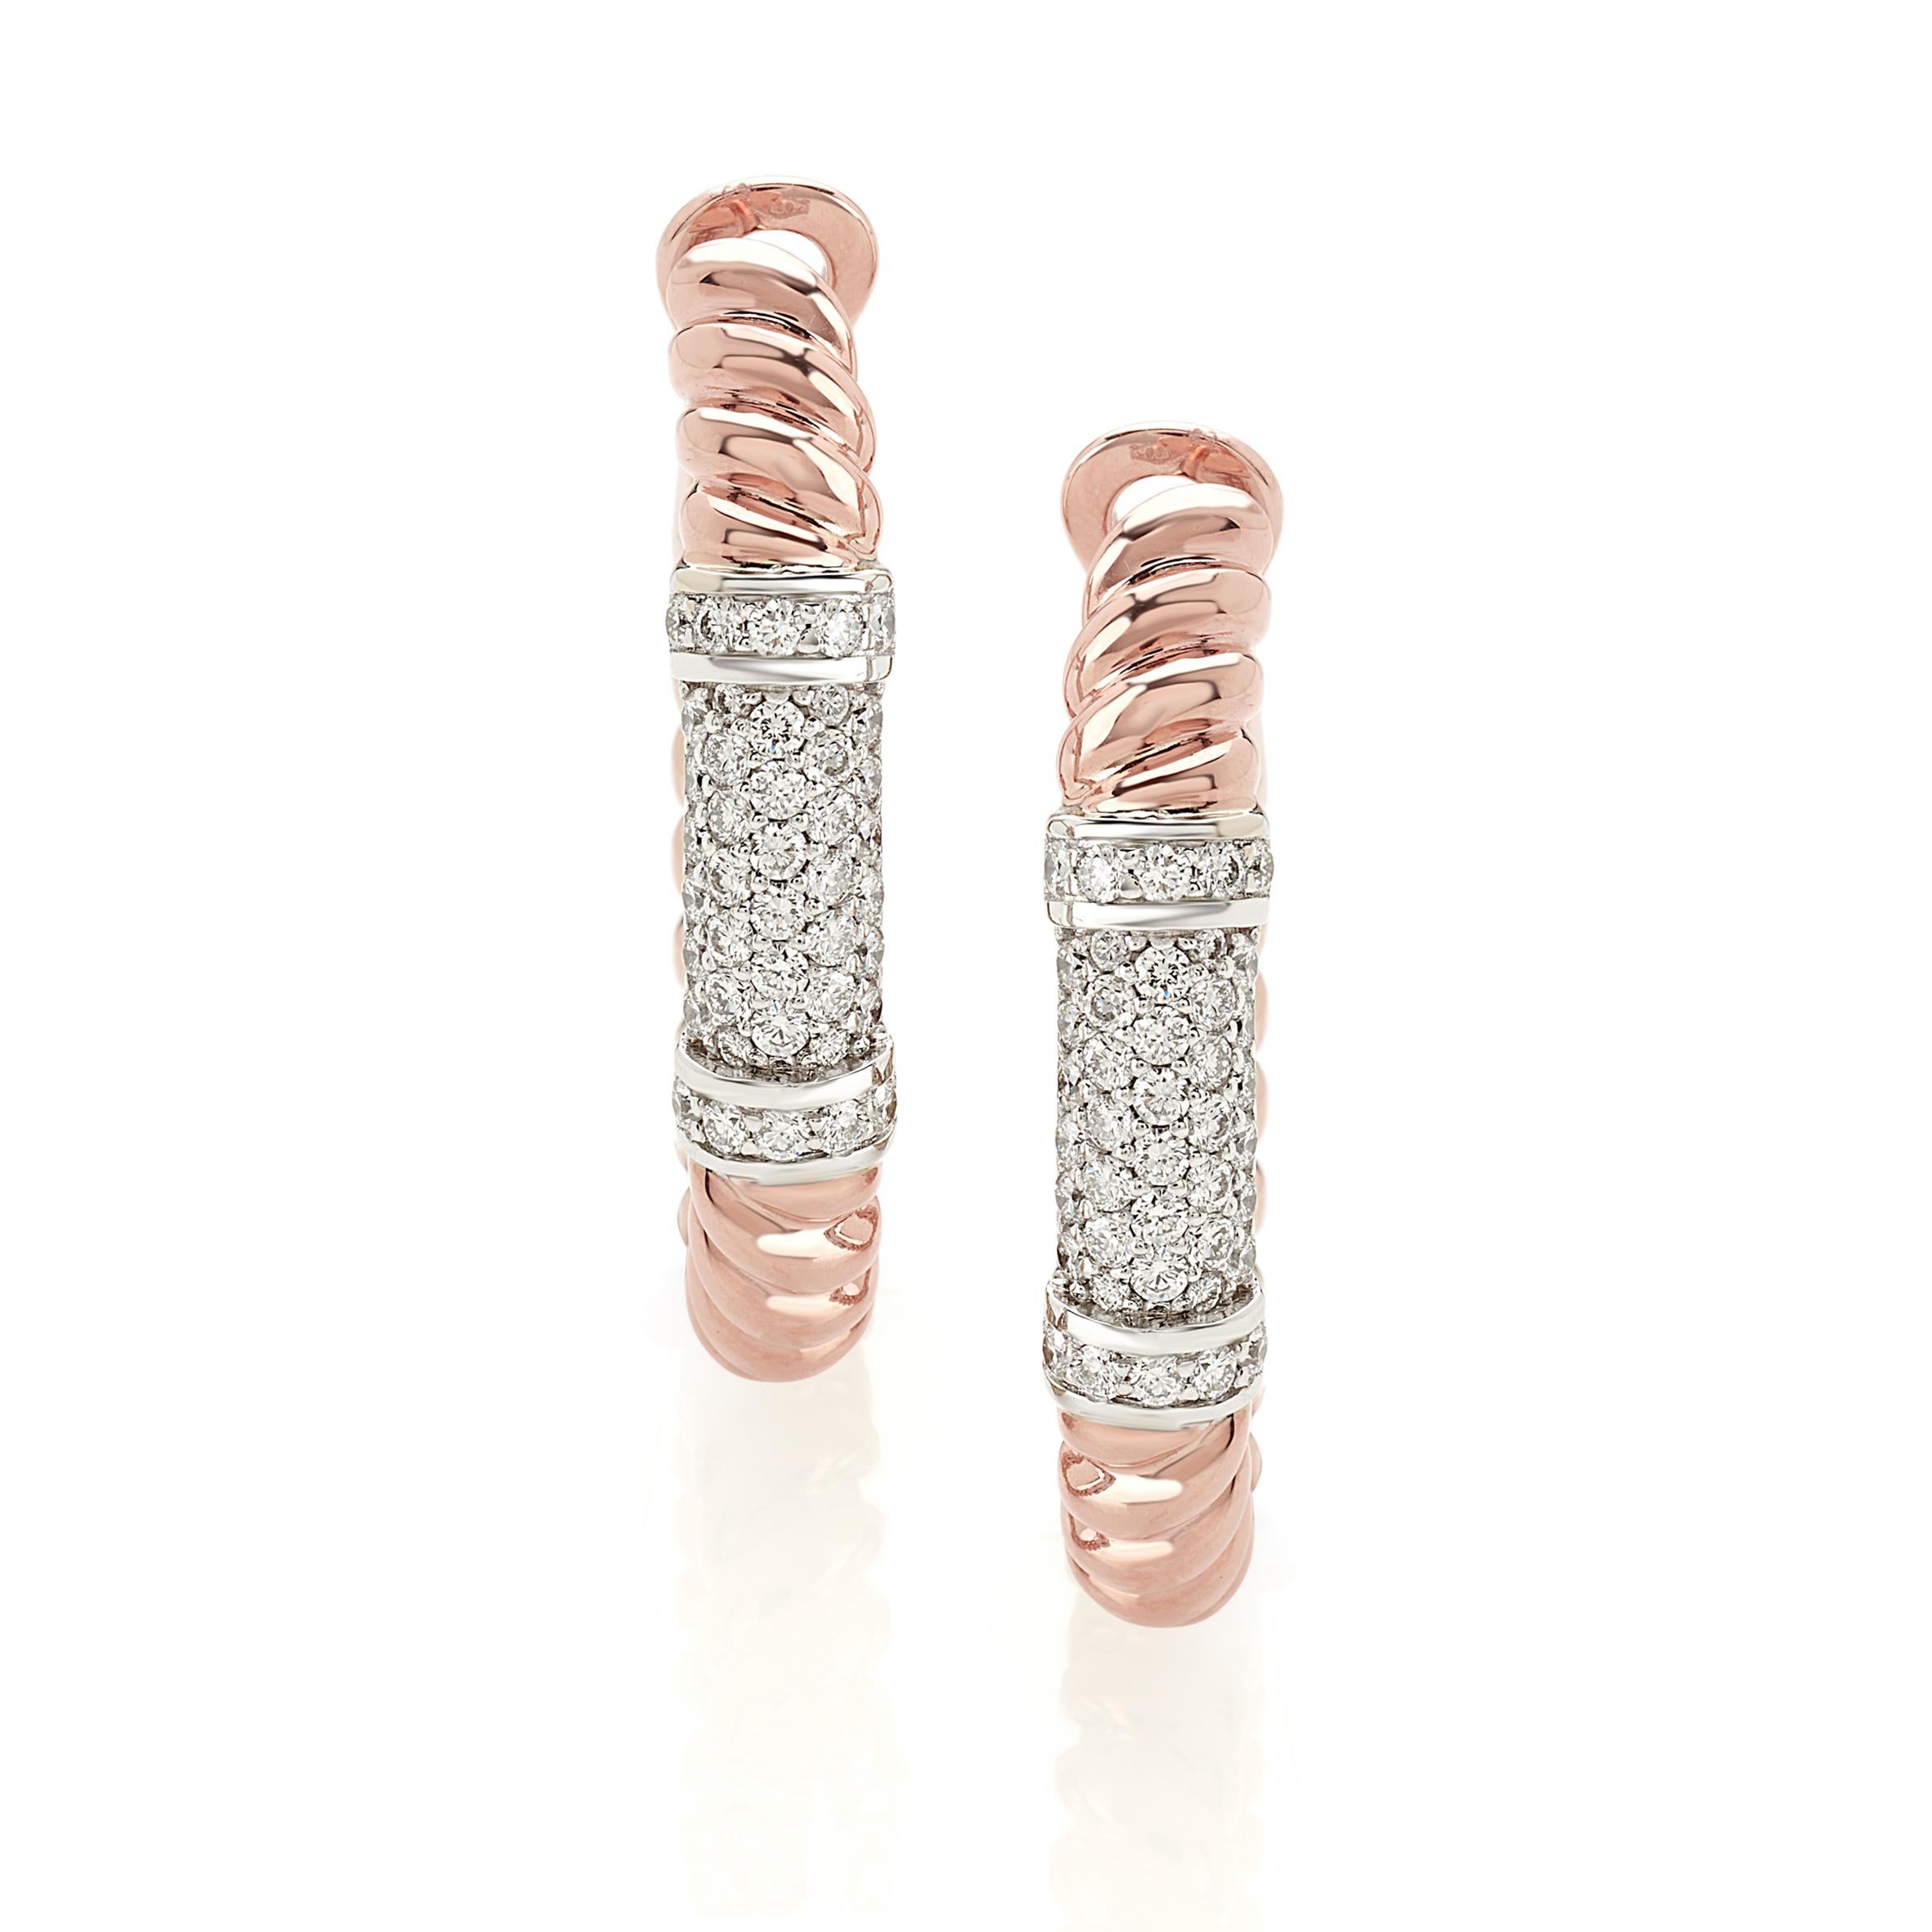 Brilliant Cut Pair of Earrings from the Collection 